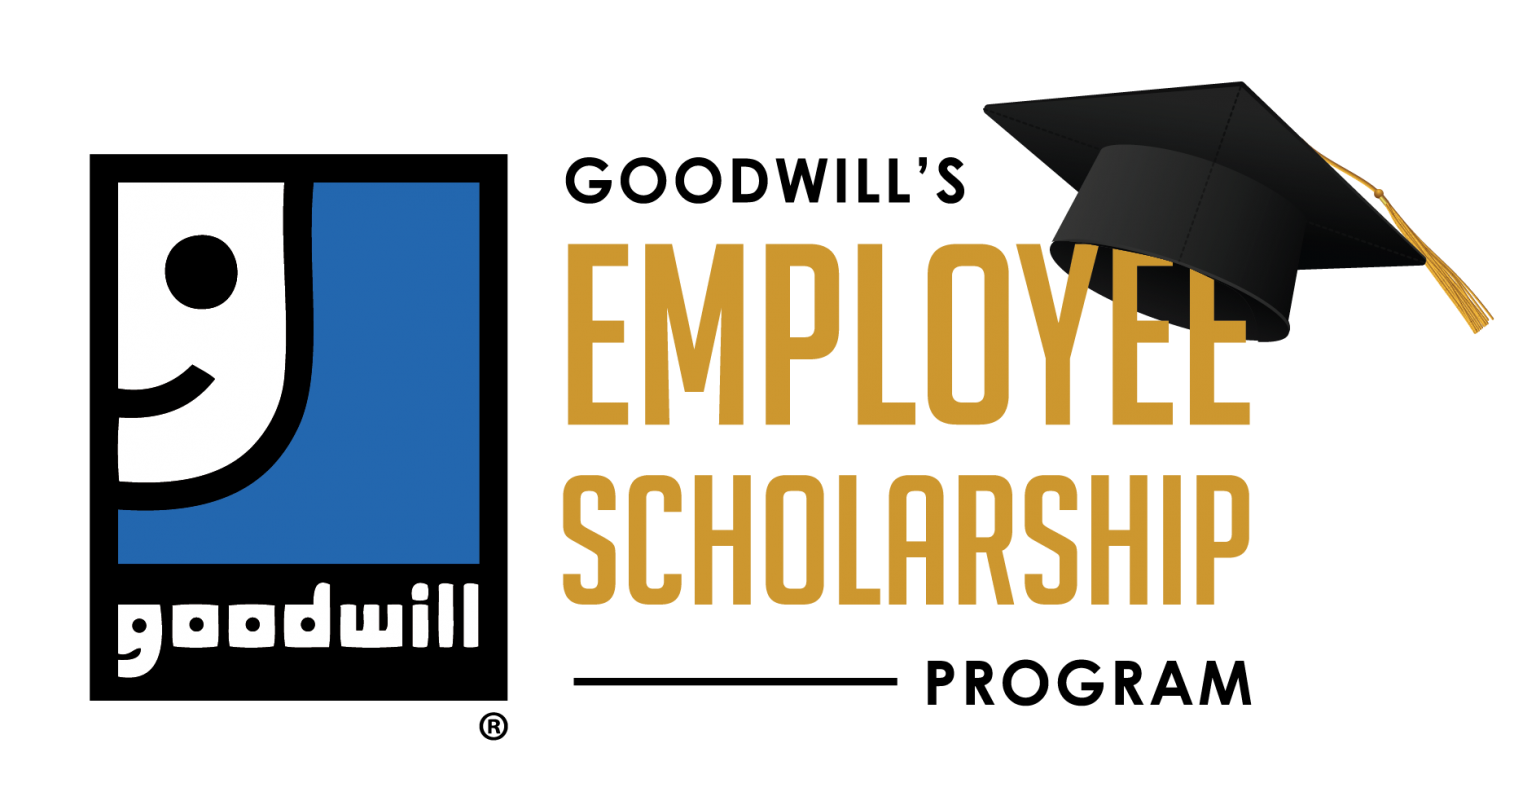 Goodwill's Employee Scholarship Program Goodwill of Central IL